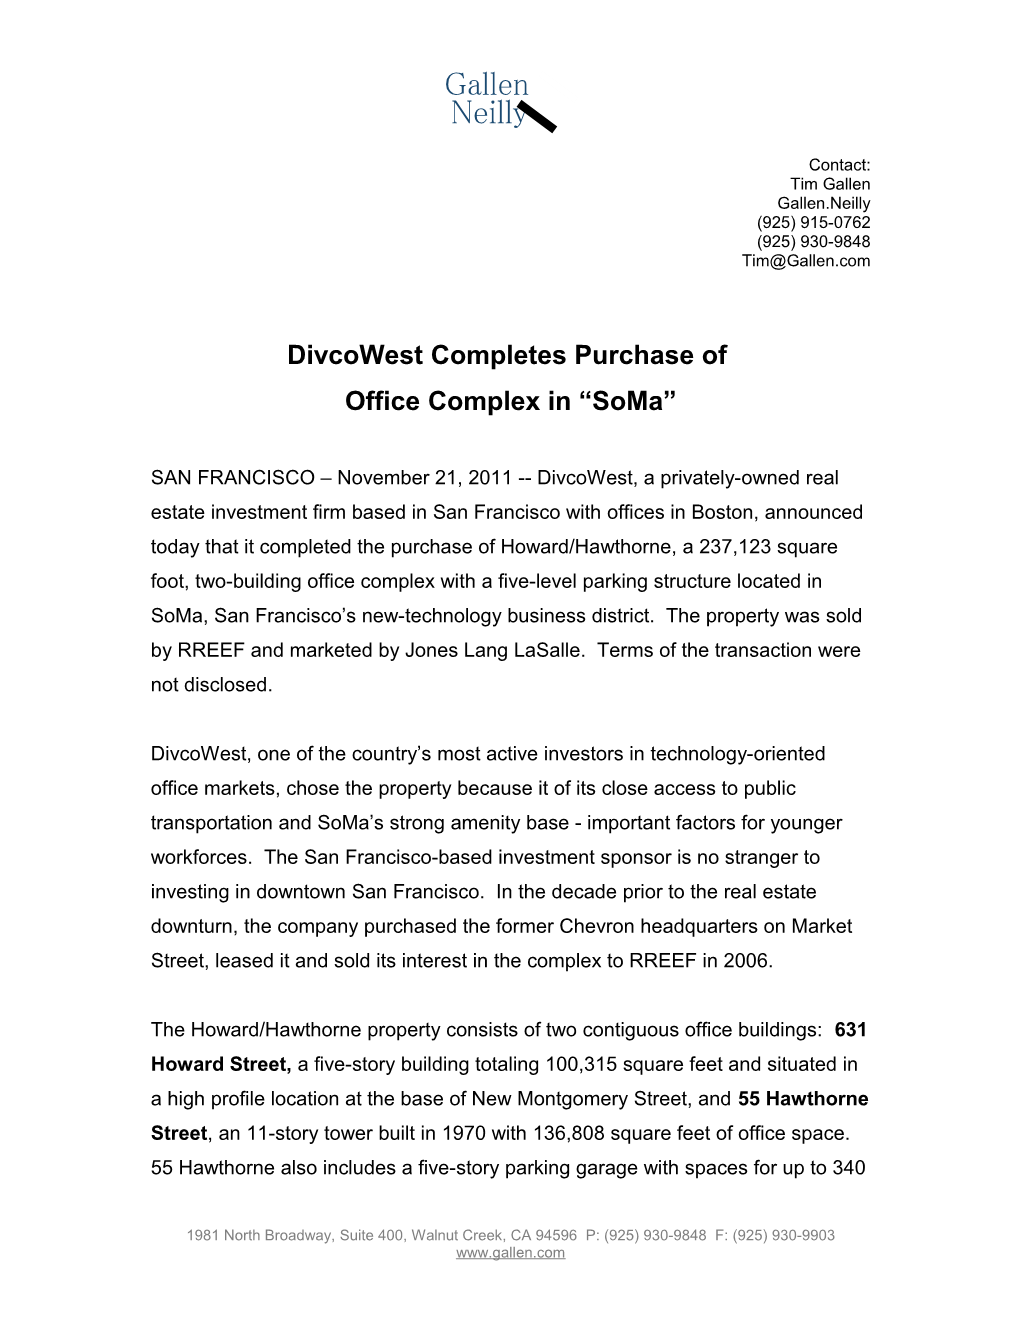 Divcowest Completes Purchase Of